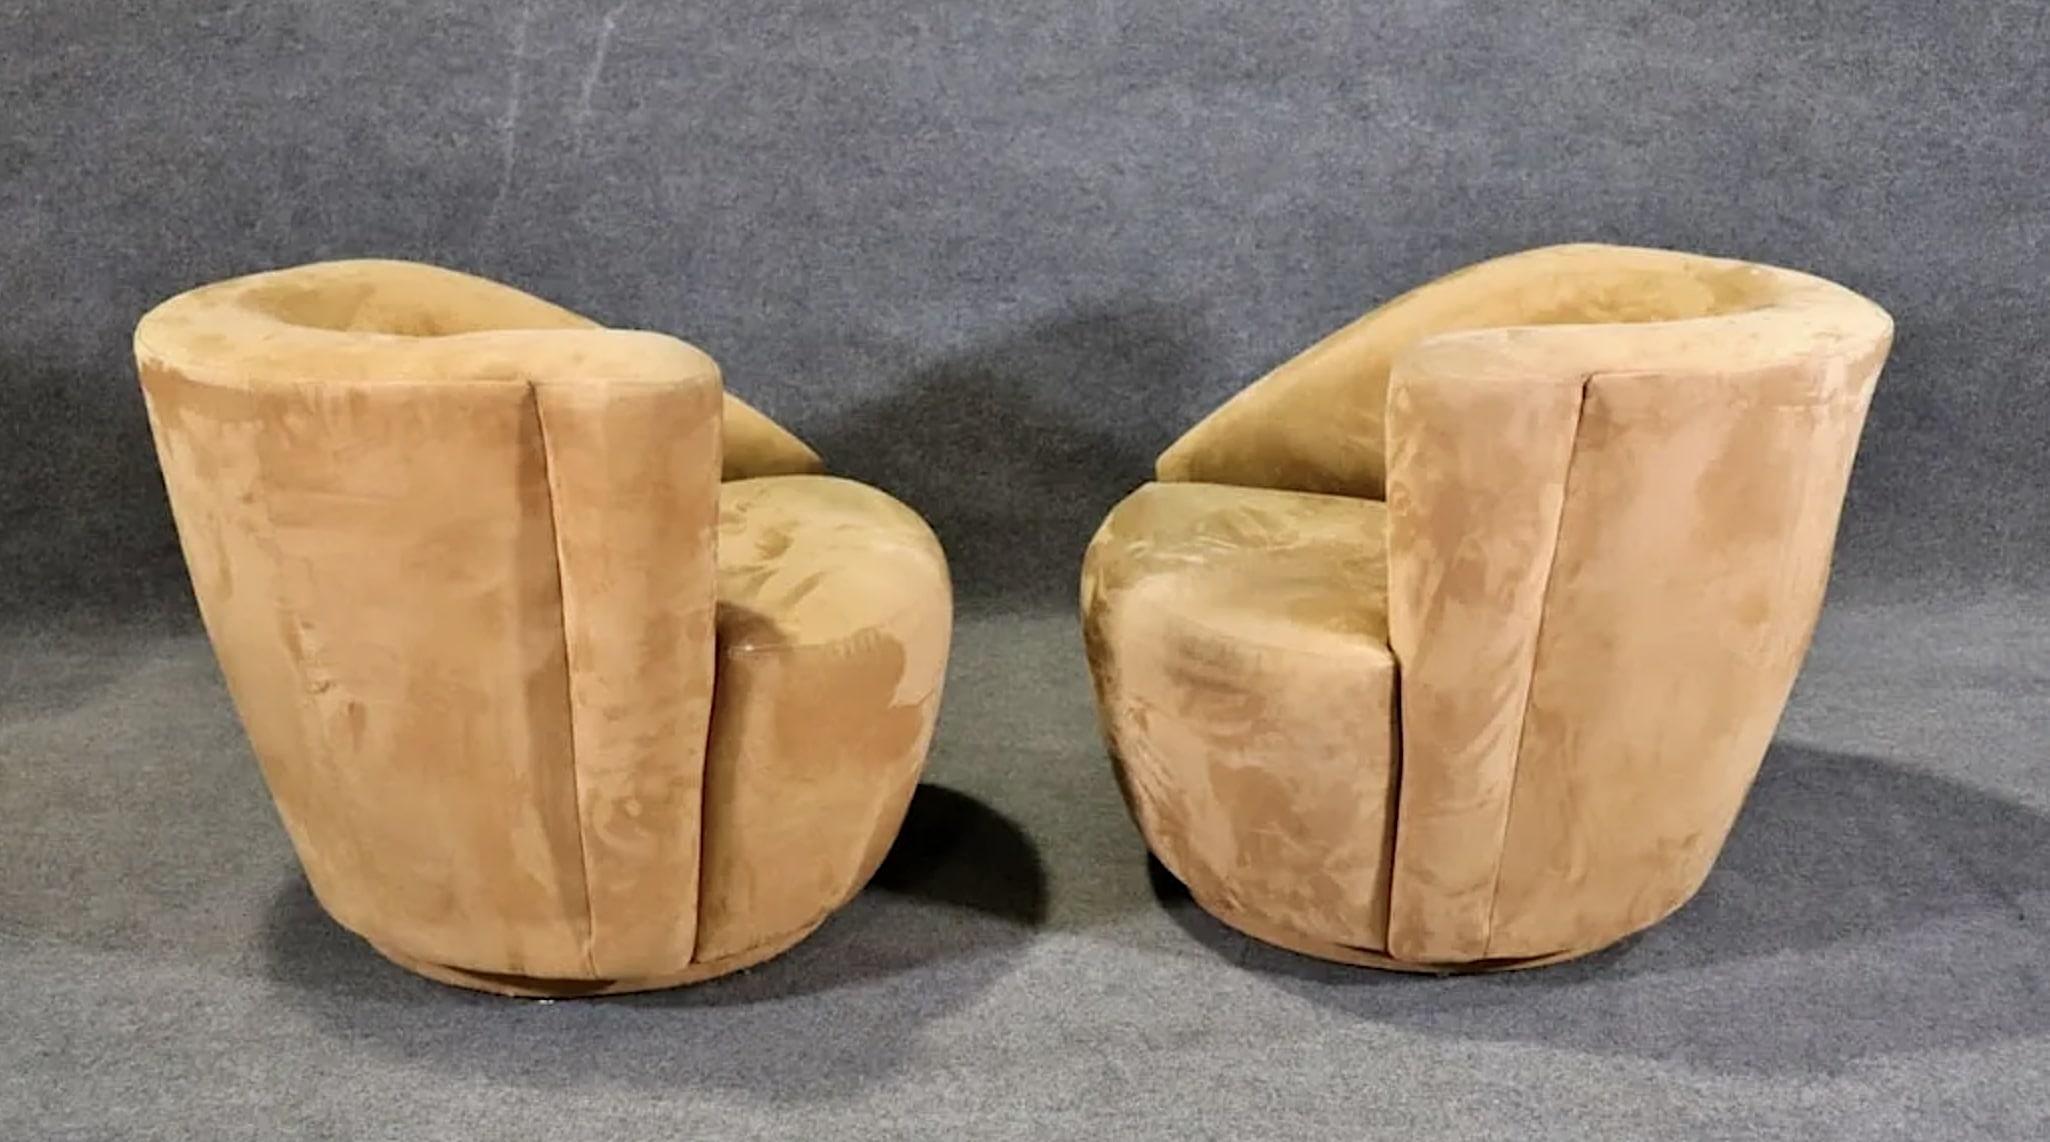 Nautilus style swivel chairs with corkscrew style body. Soft ultra suede fabric.
Please confirm location NY or NJ